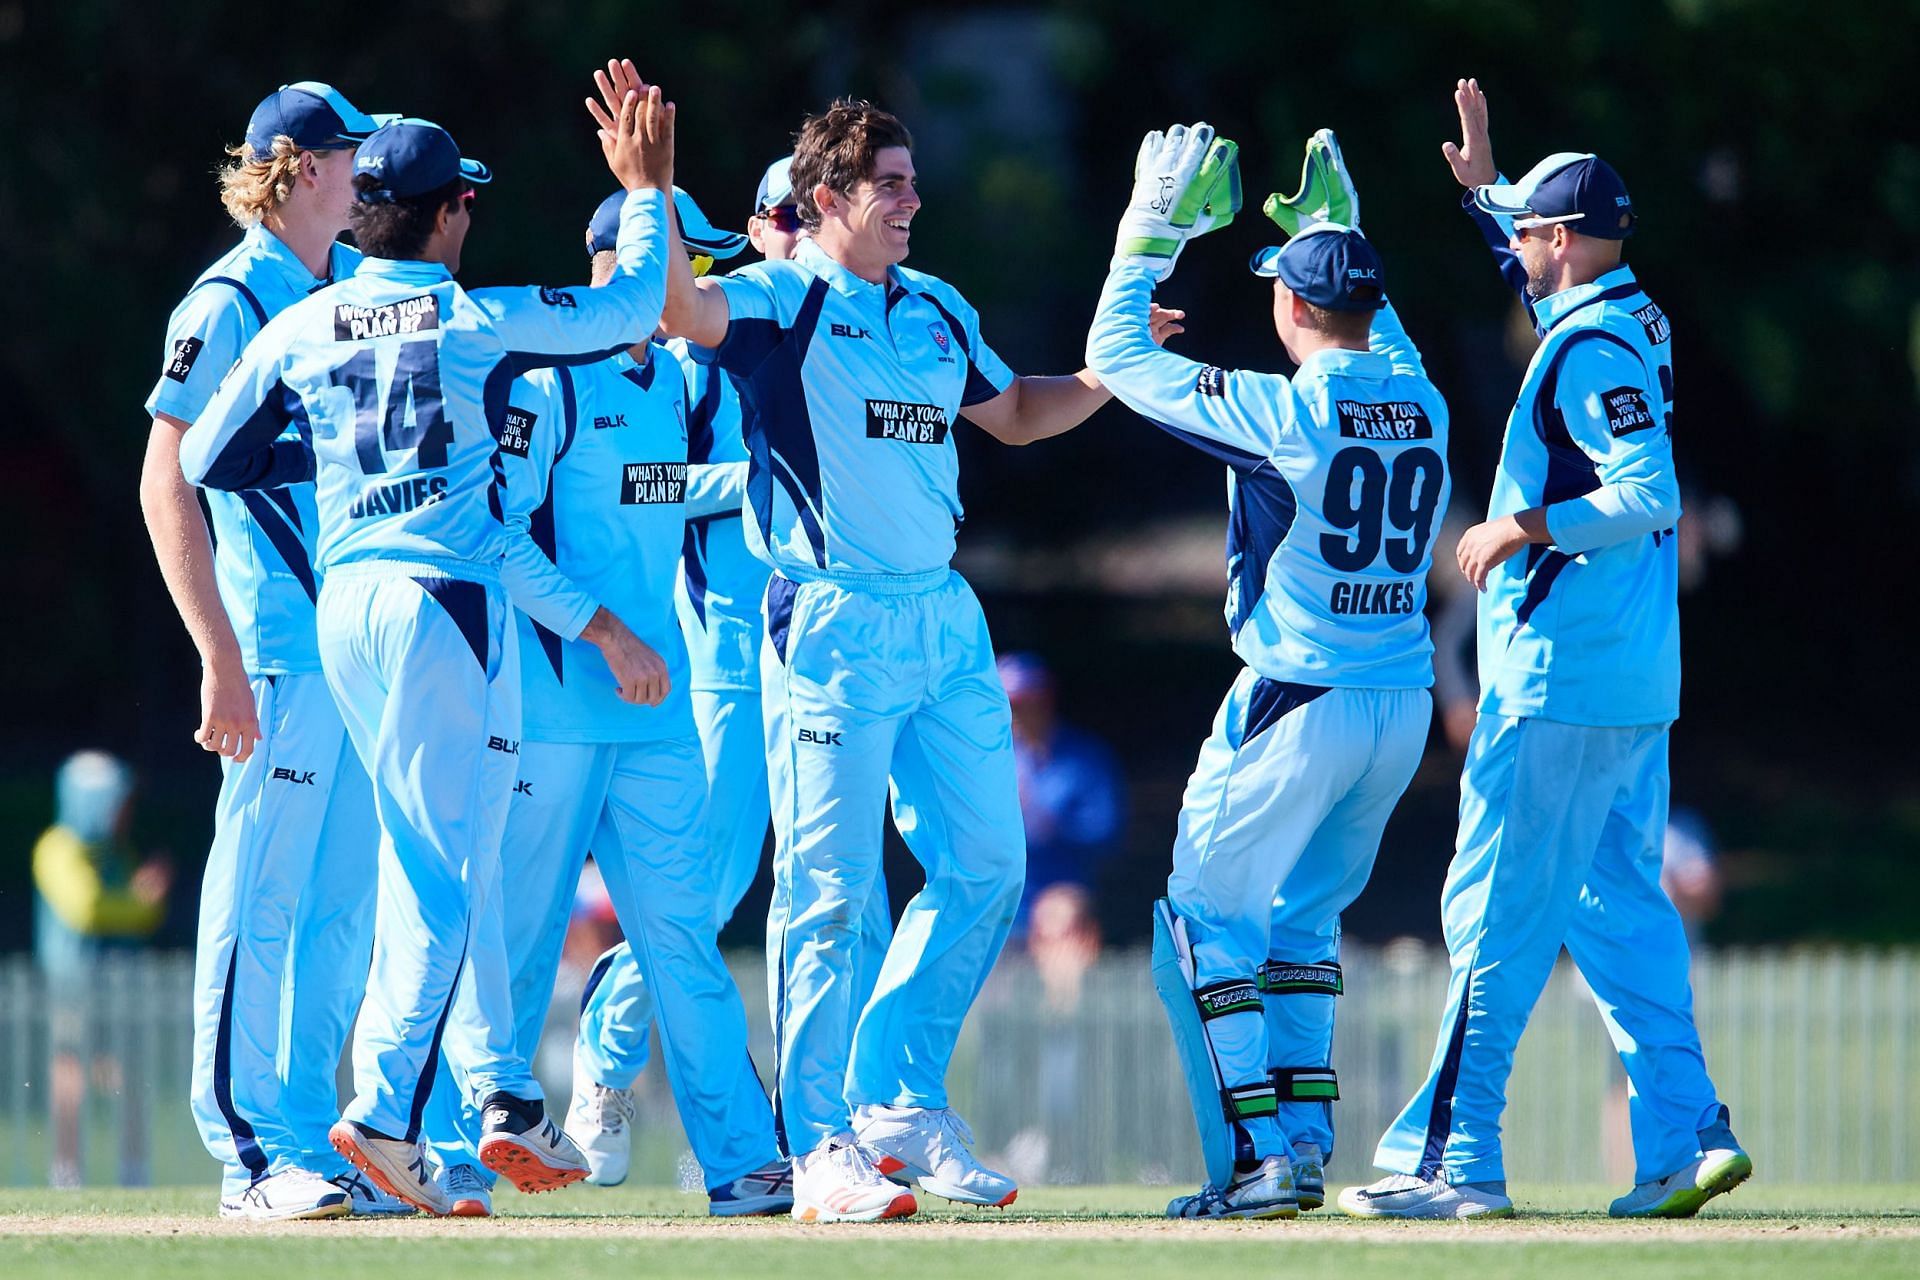 2021 Marsh One Day Cup Final - NSW v WA